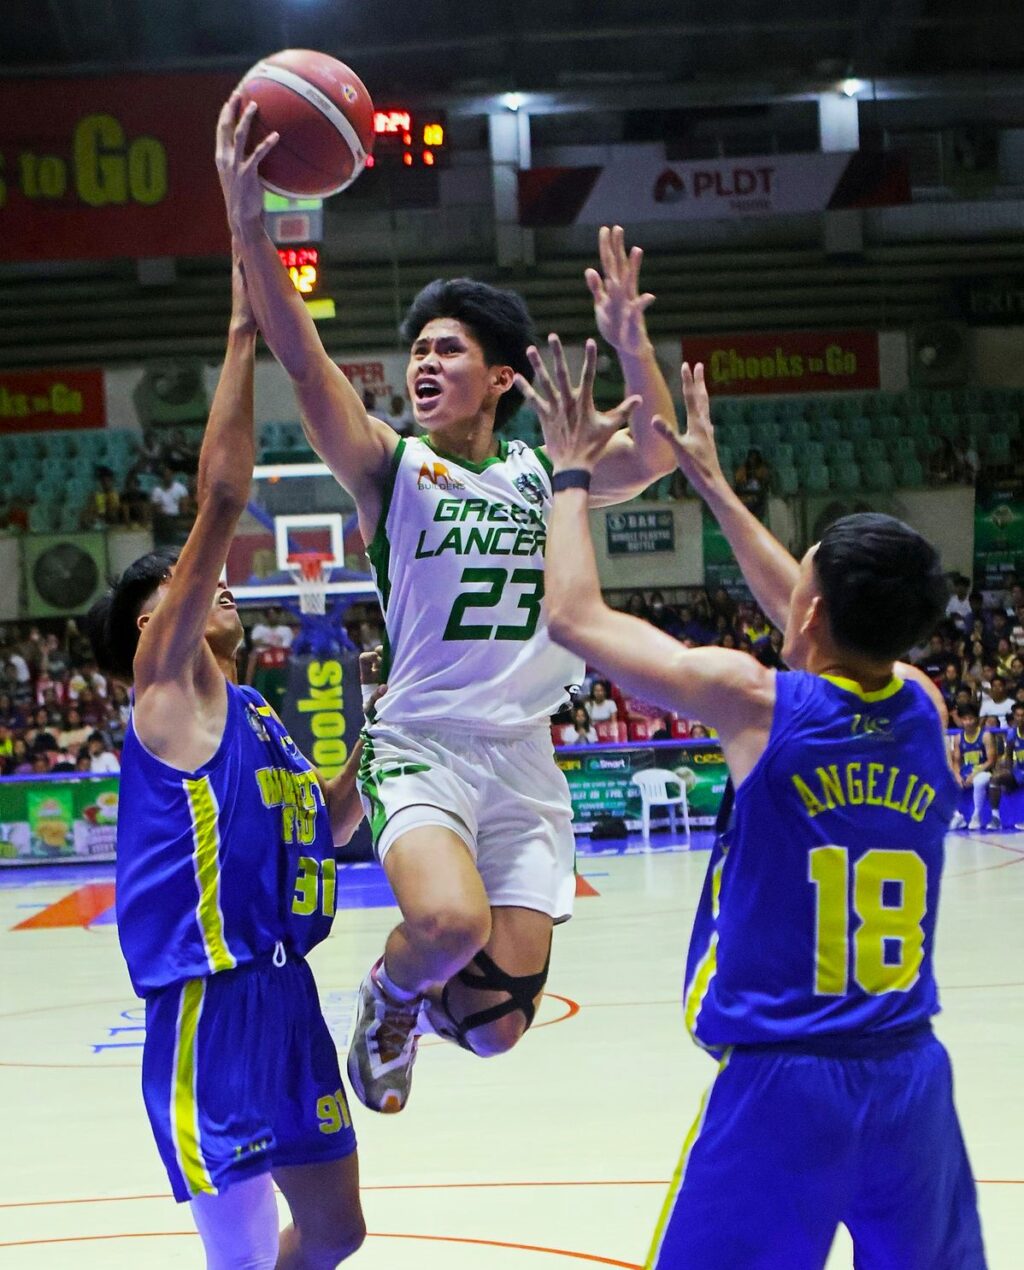 Raul Gentallan of the UV Green Lancers soars high between two UC Webmasters defenders during their game in the Cesafi men's basketball.